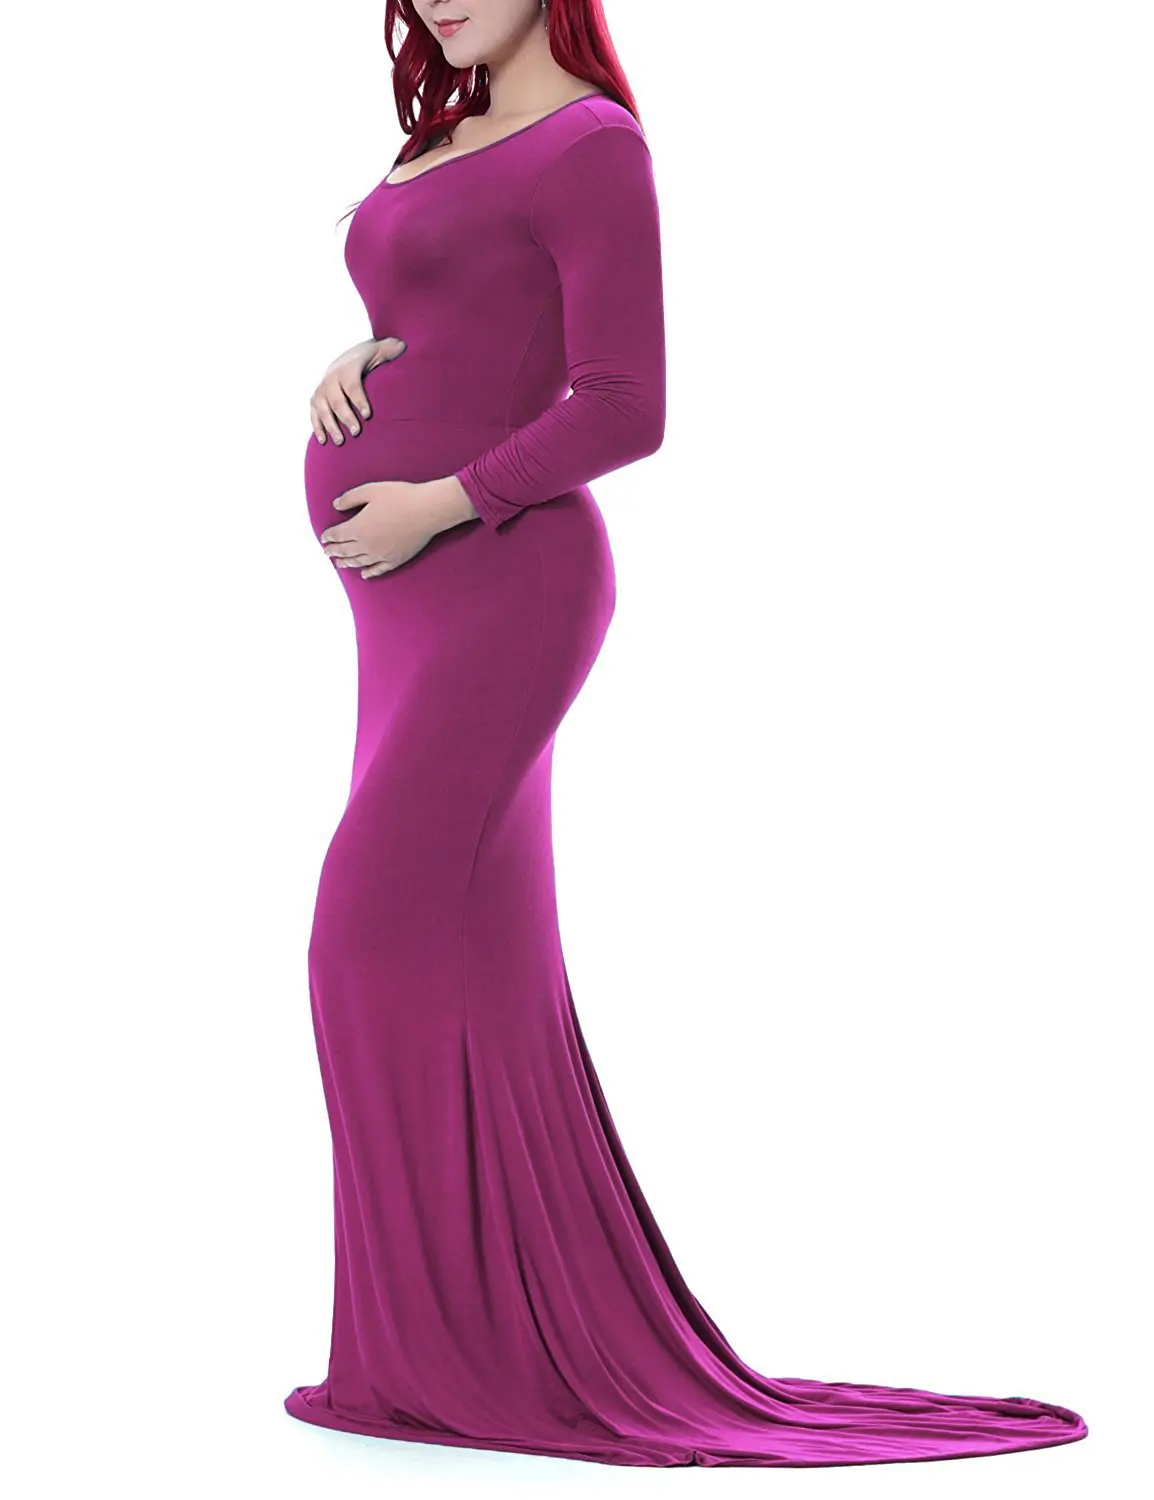 Maternity Gown Photography Floor Dress Long Tail Dress for Pregnant Woman Baby Shower Dress for Women Photo Shoot enlarge